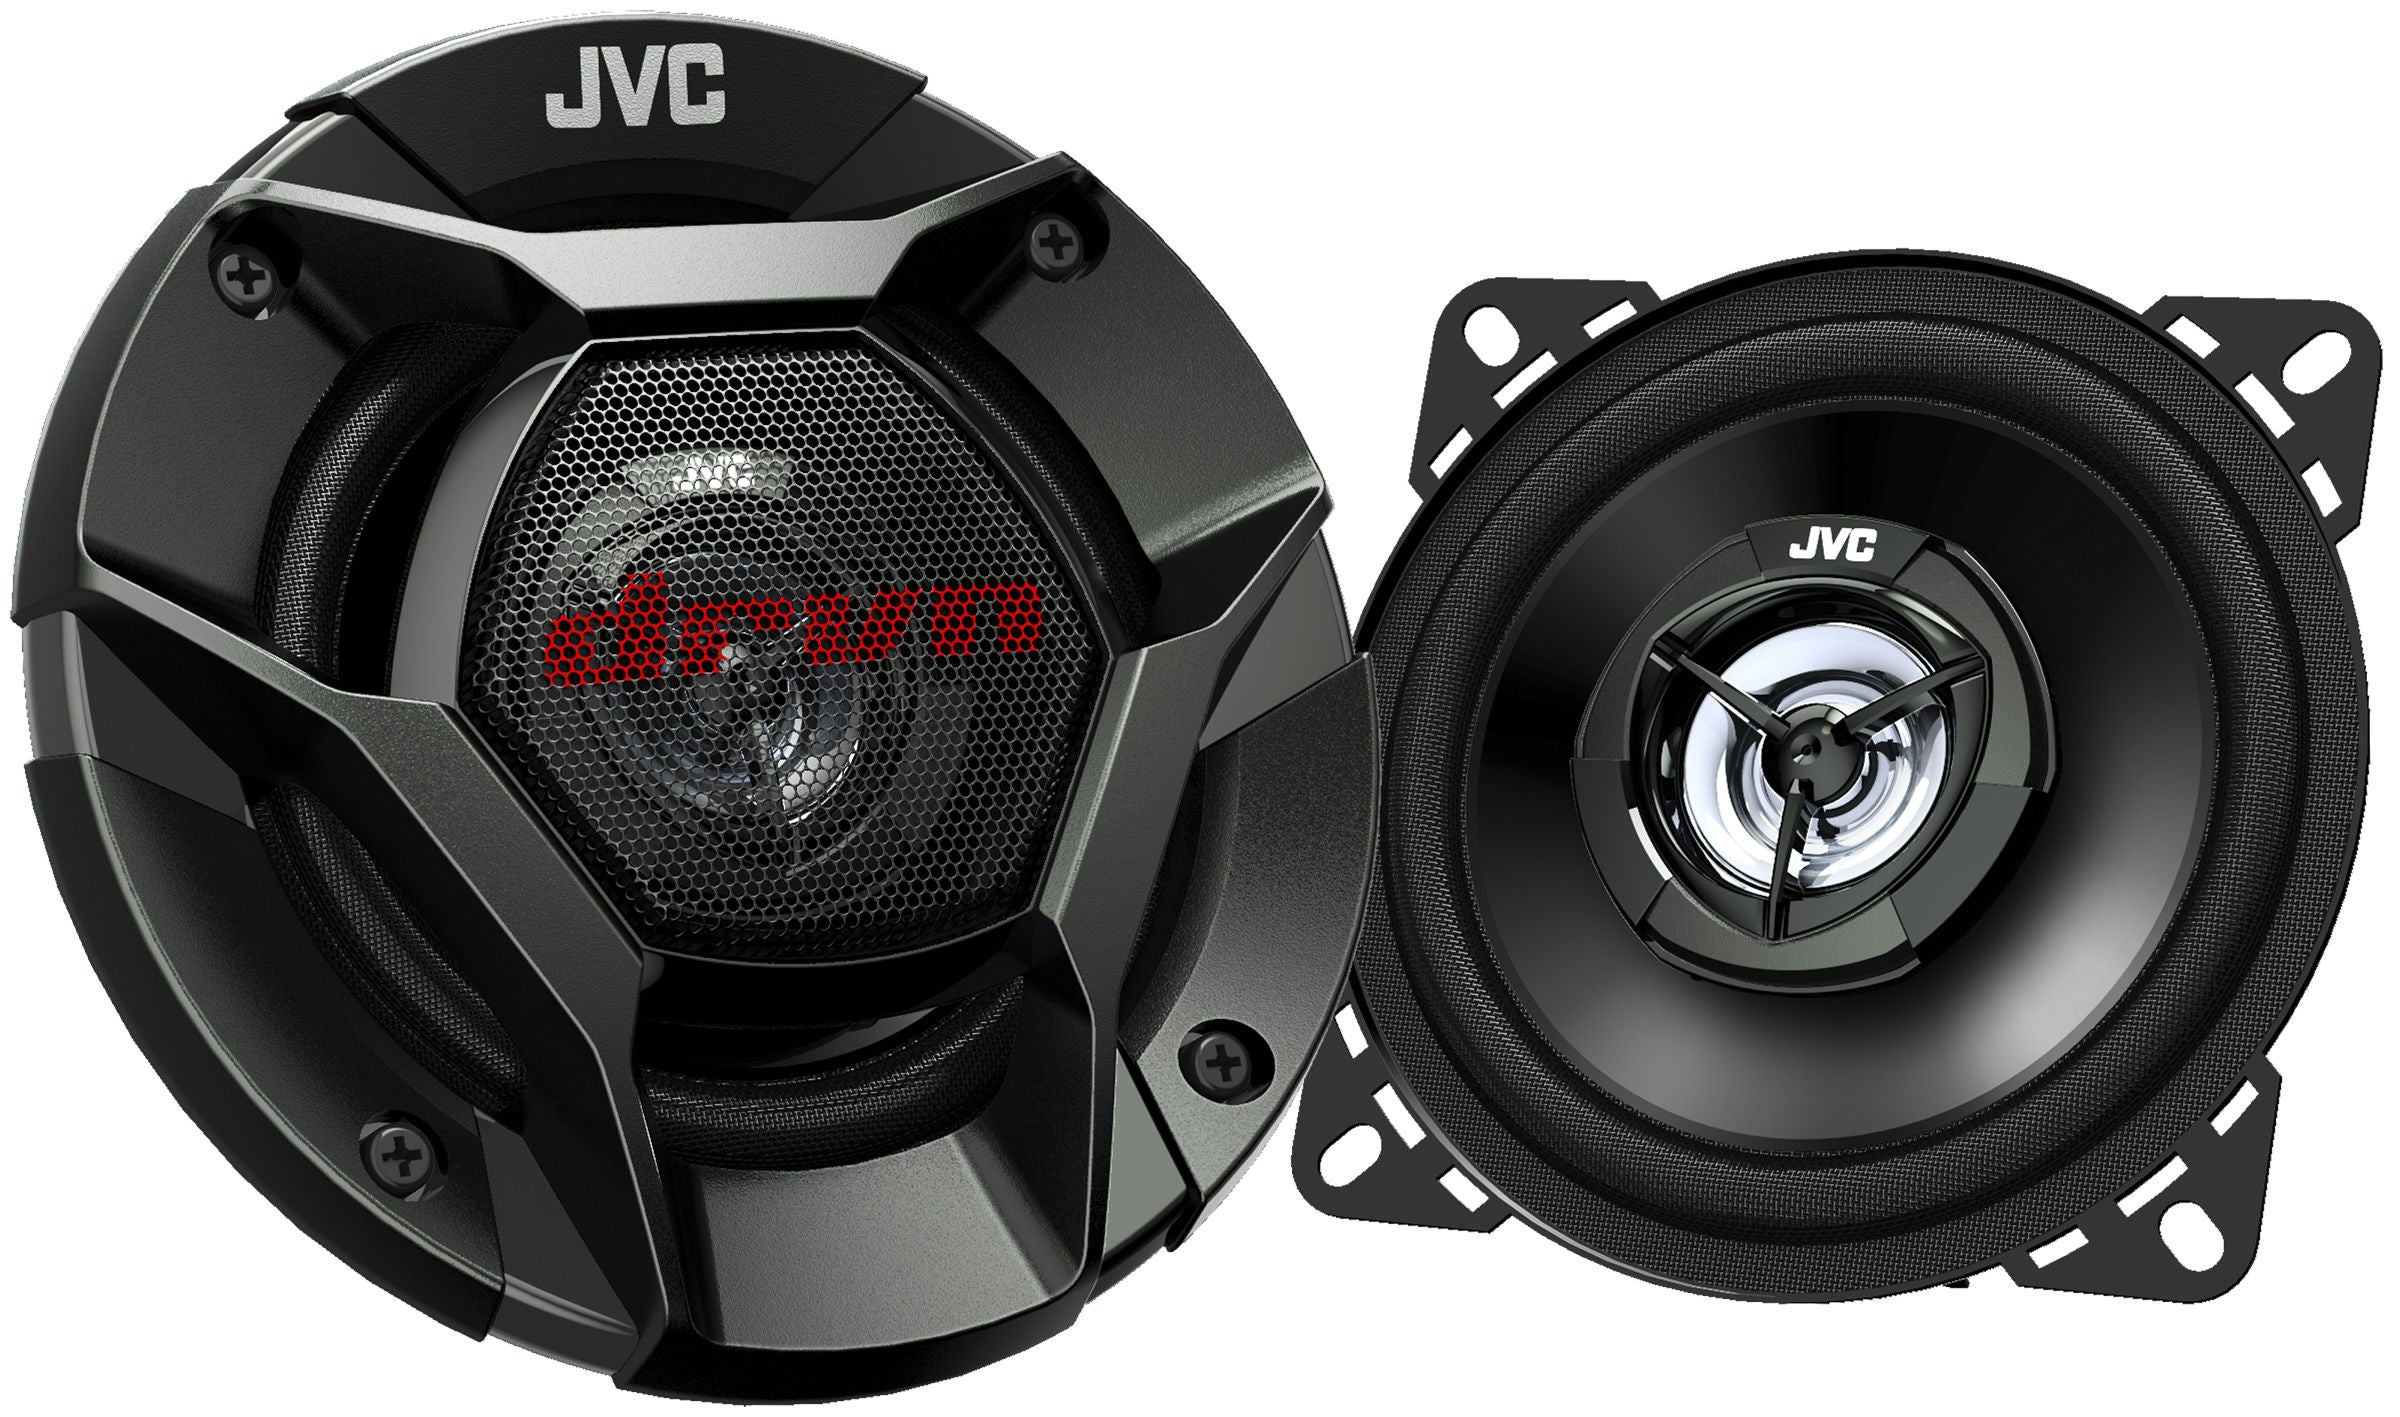 4" 2-Way Coaxial Speakers 200w Max Power